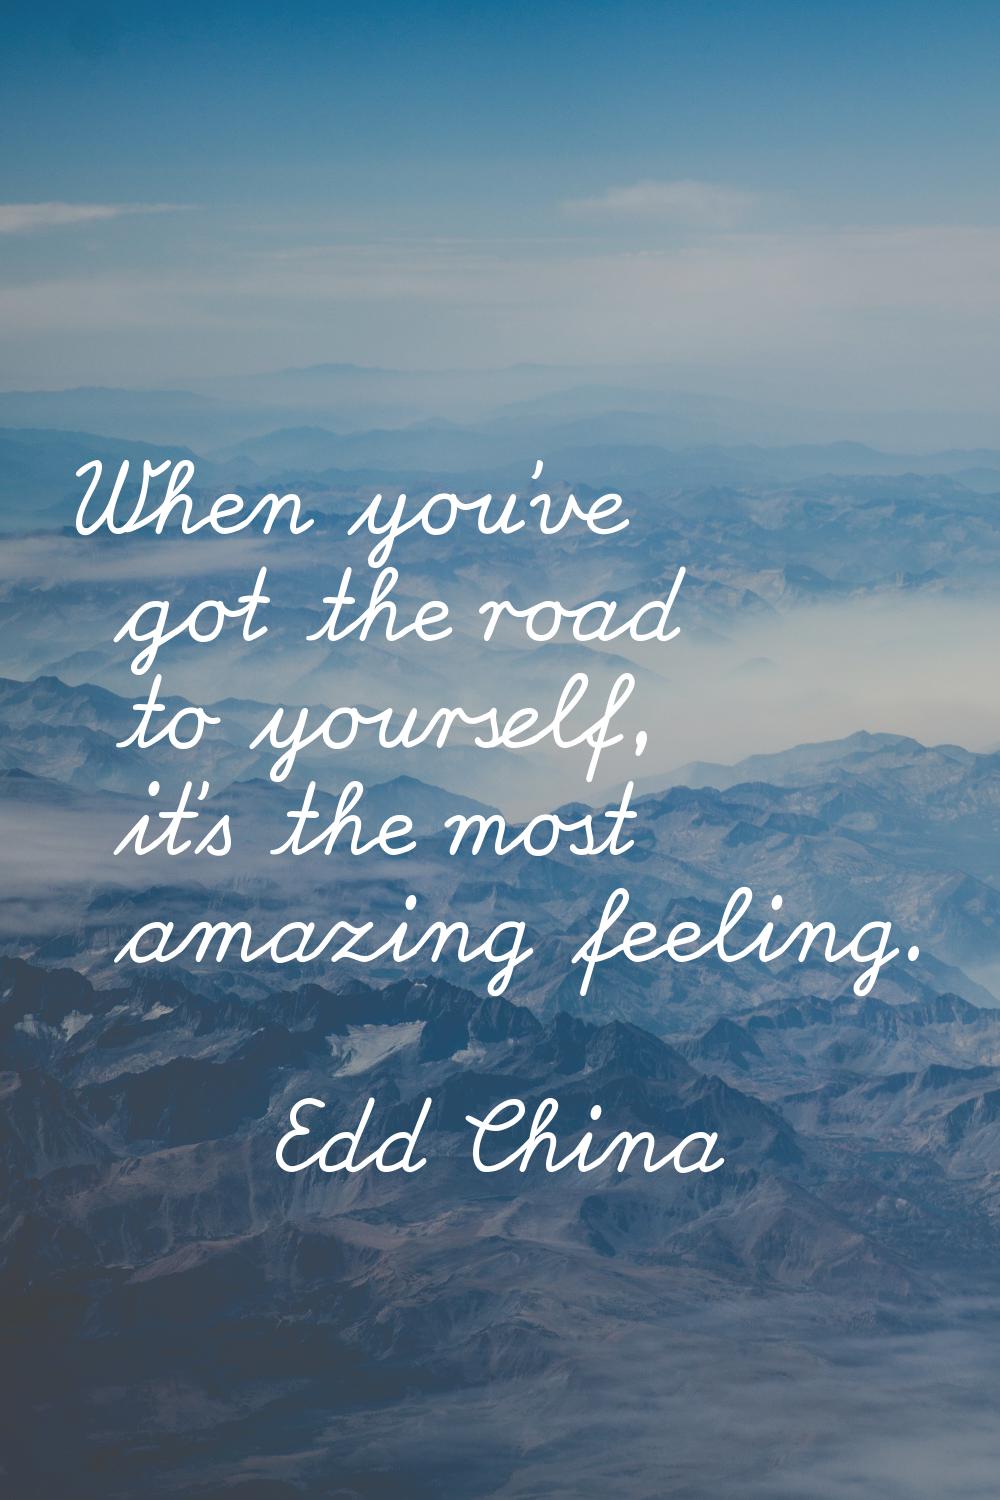 When you've got the road to yourself, it's the most amazing feeling.